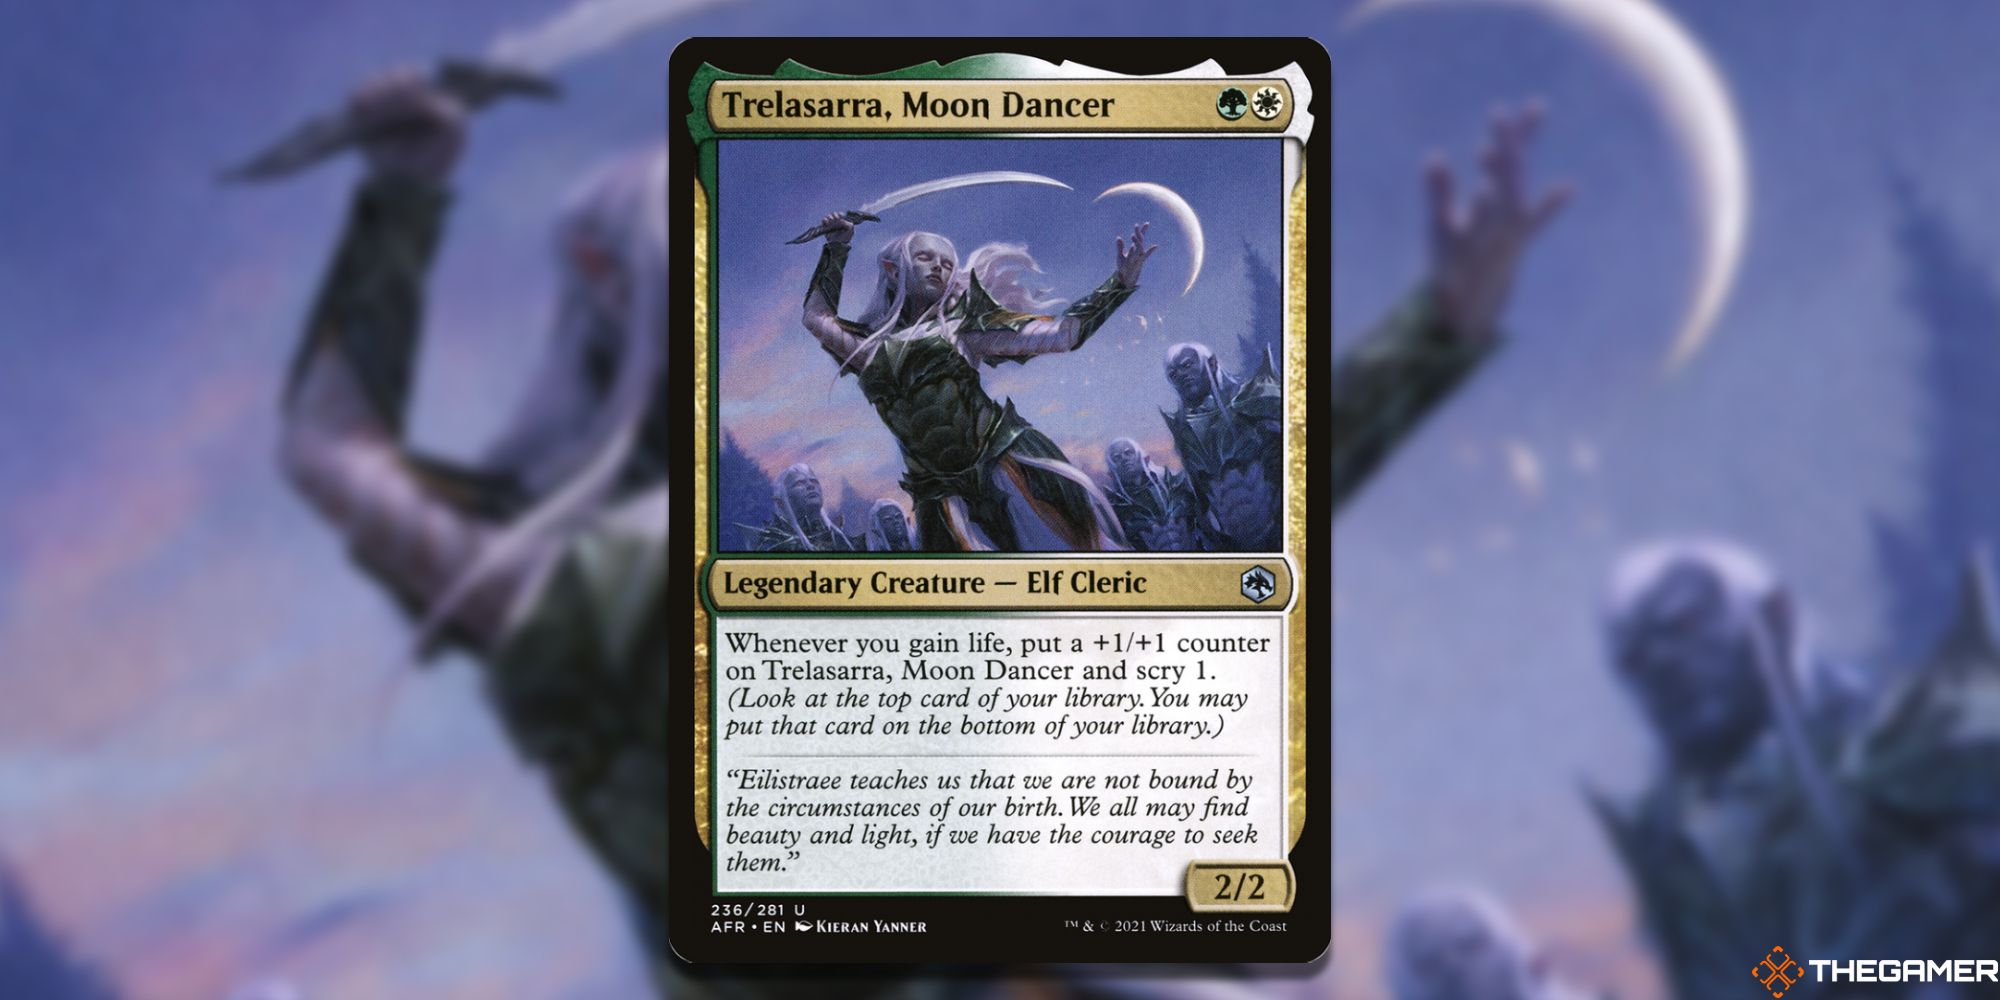 Image of the Trelasarra, Moon Dancer card in Magic: The Gathering, with art by Kieran Yanner